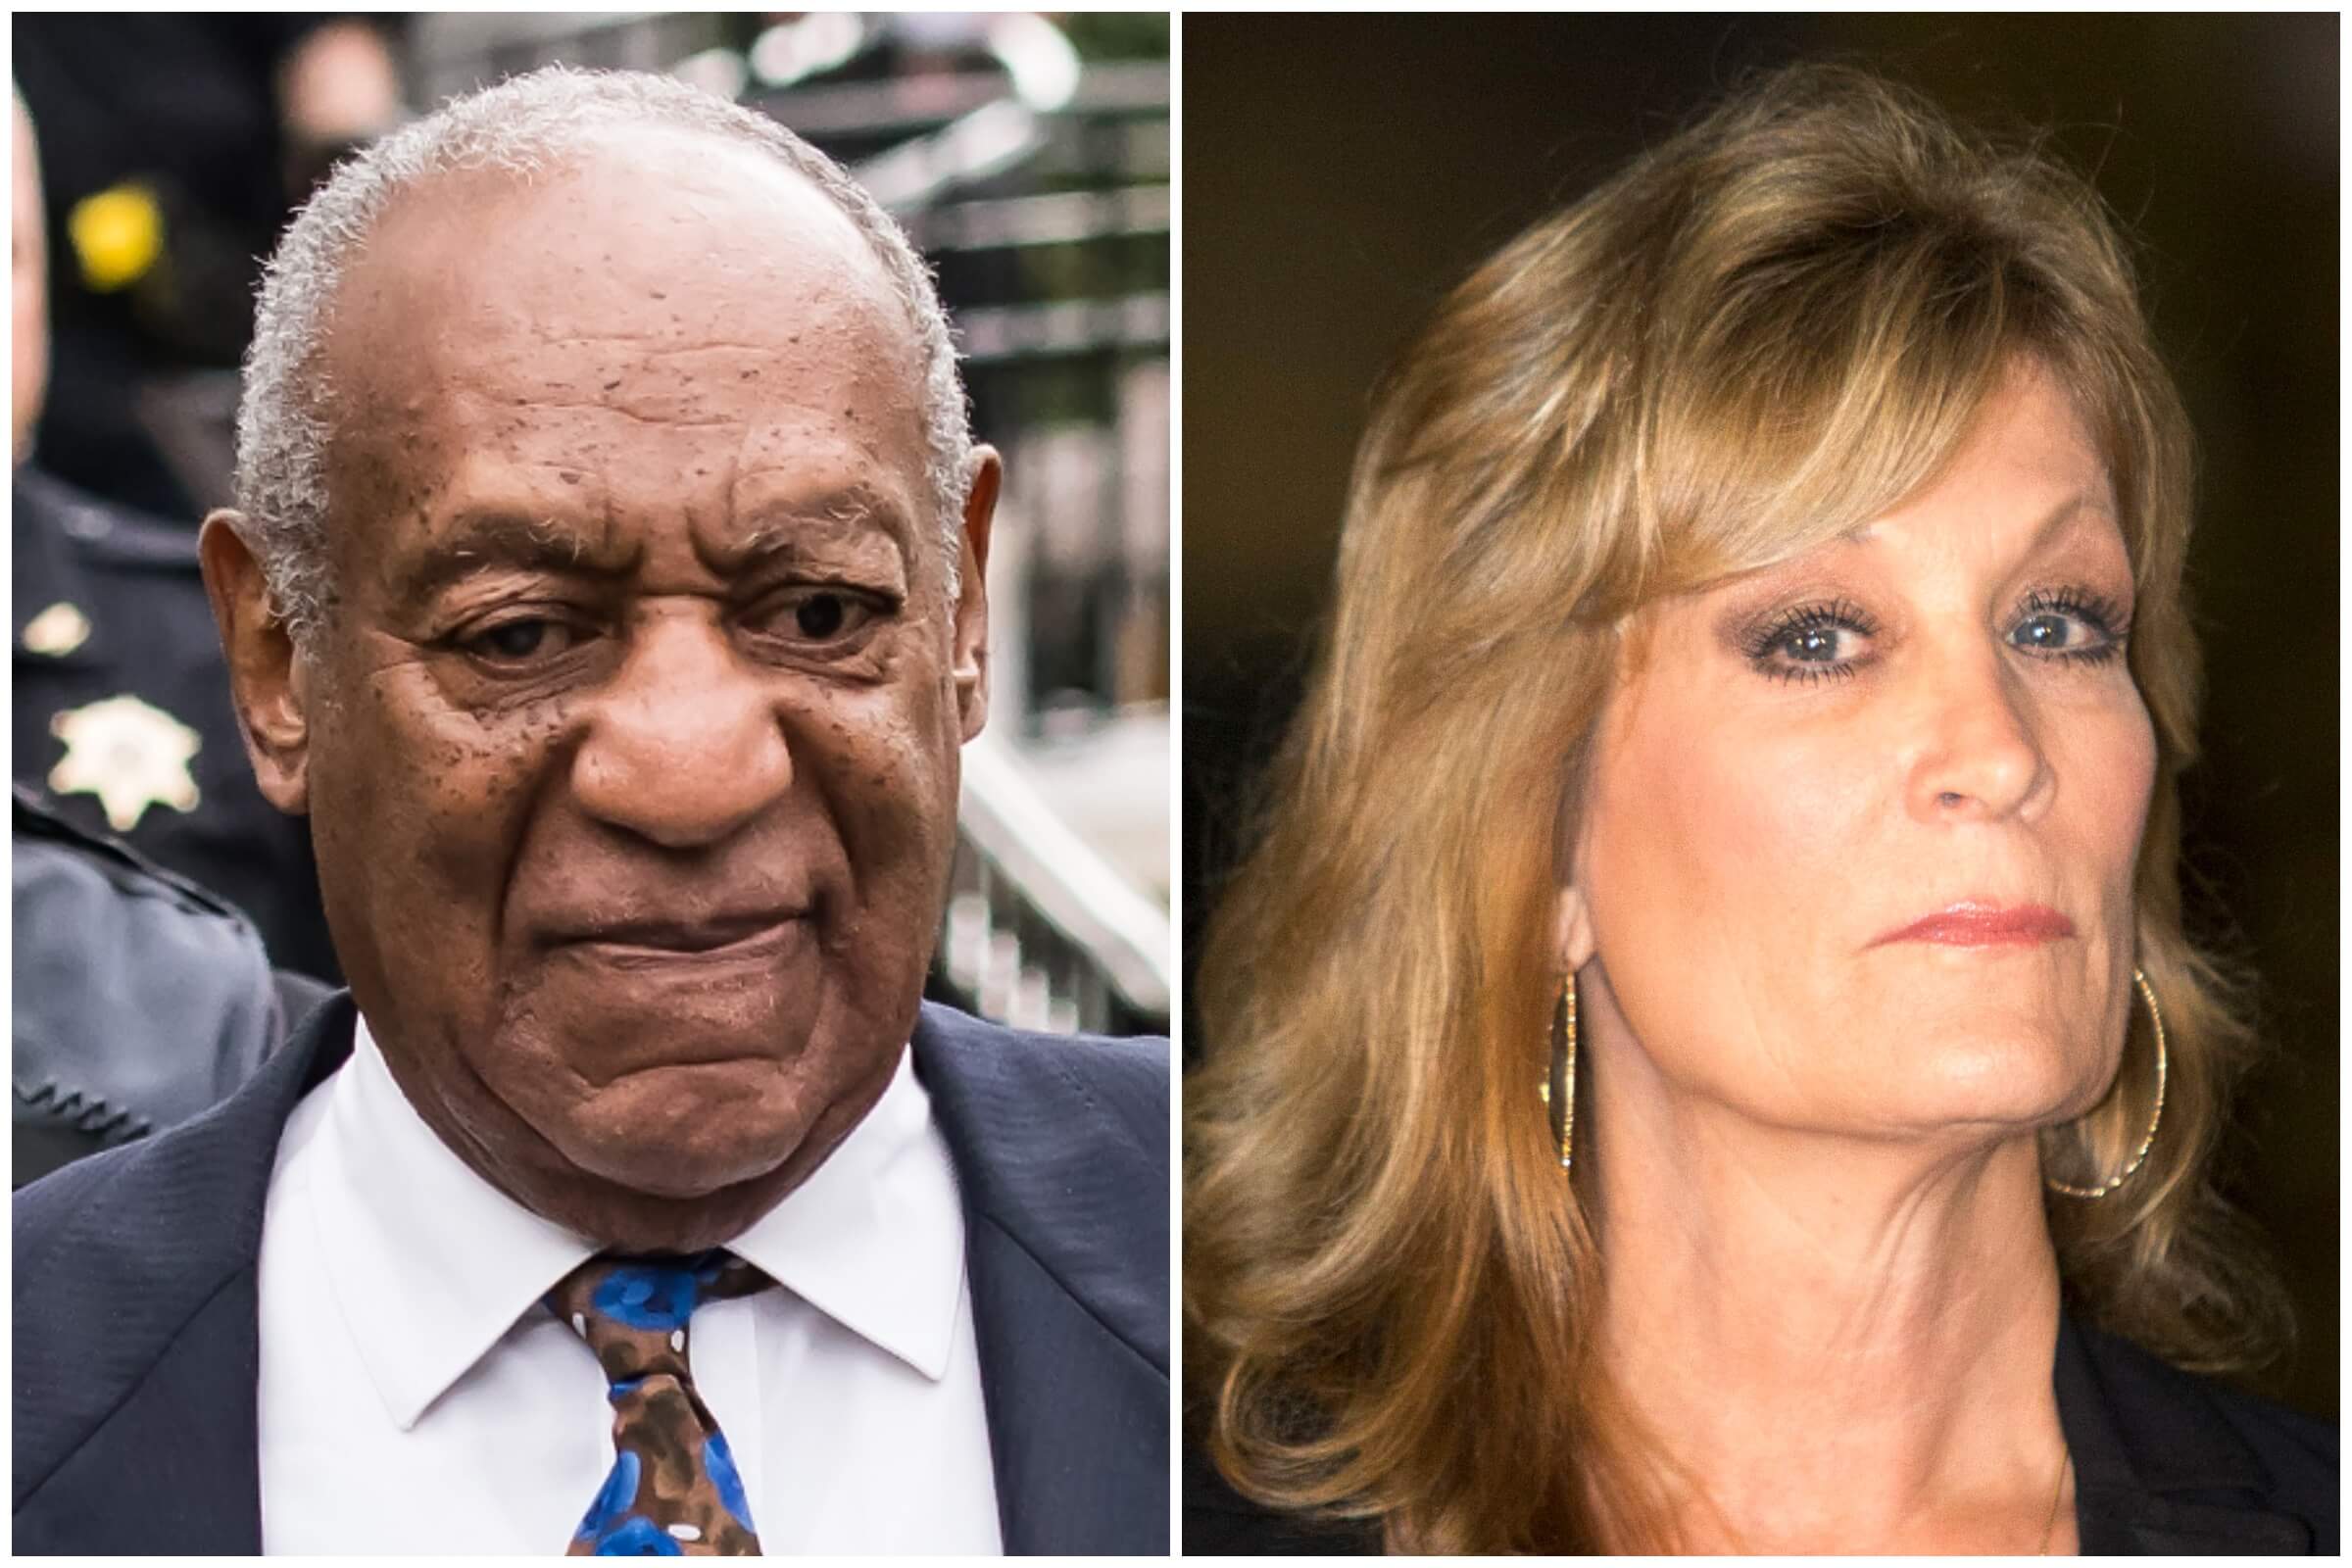 Judy Huth and Bill Cosby case